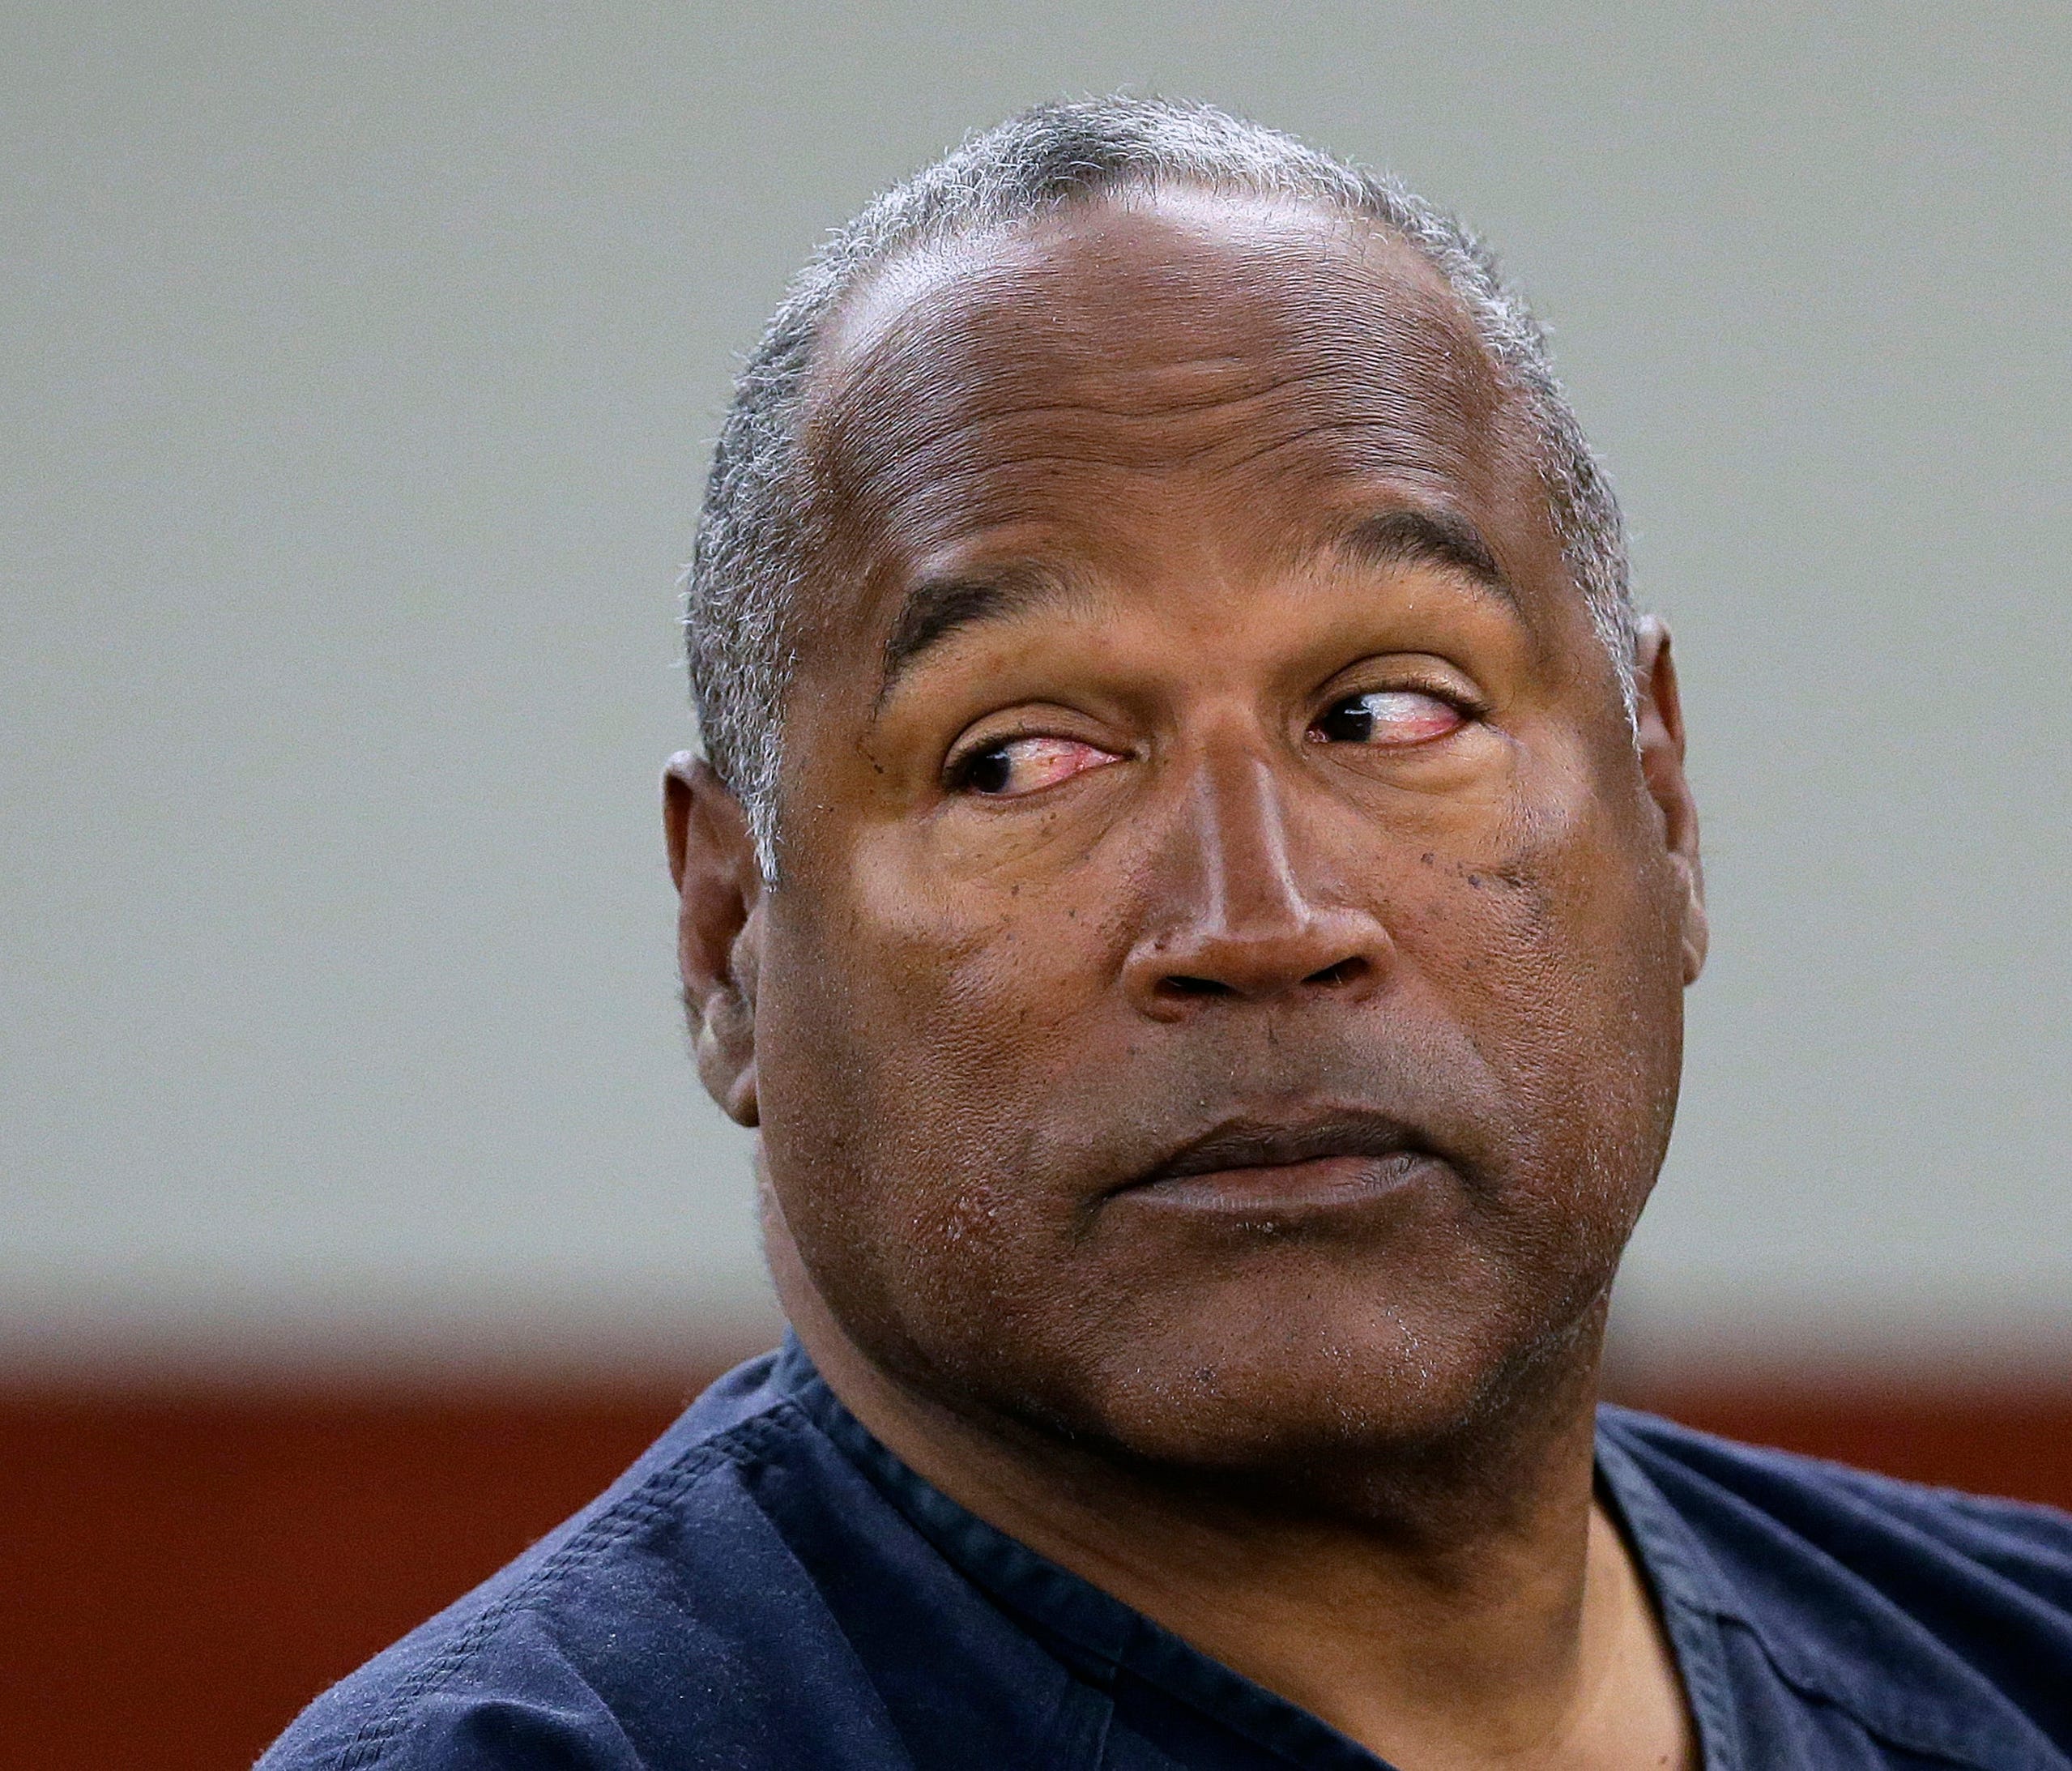 O.J. Simpson, shown in 2013, is likely to be released from prison this year after serving nine years.